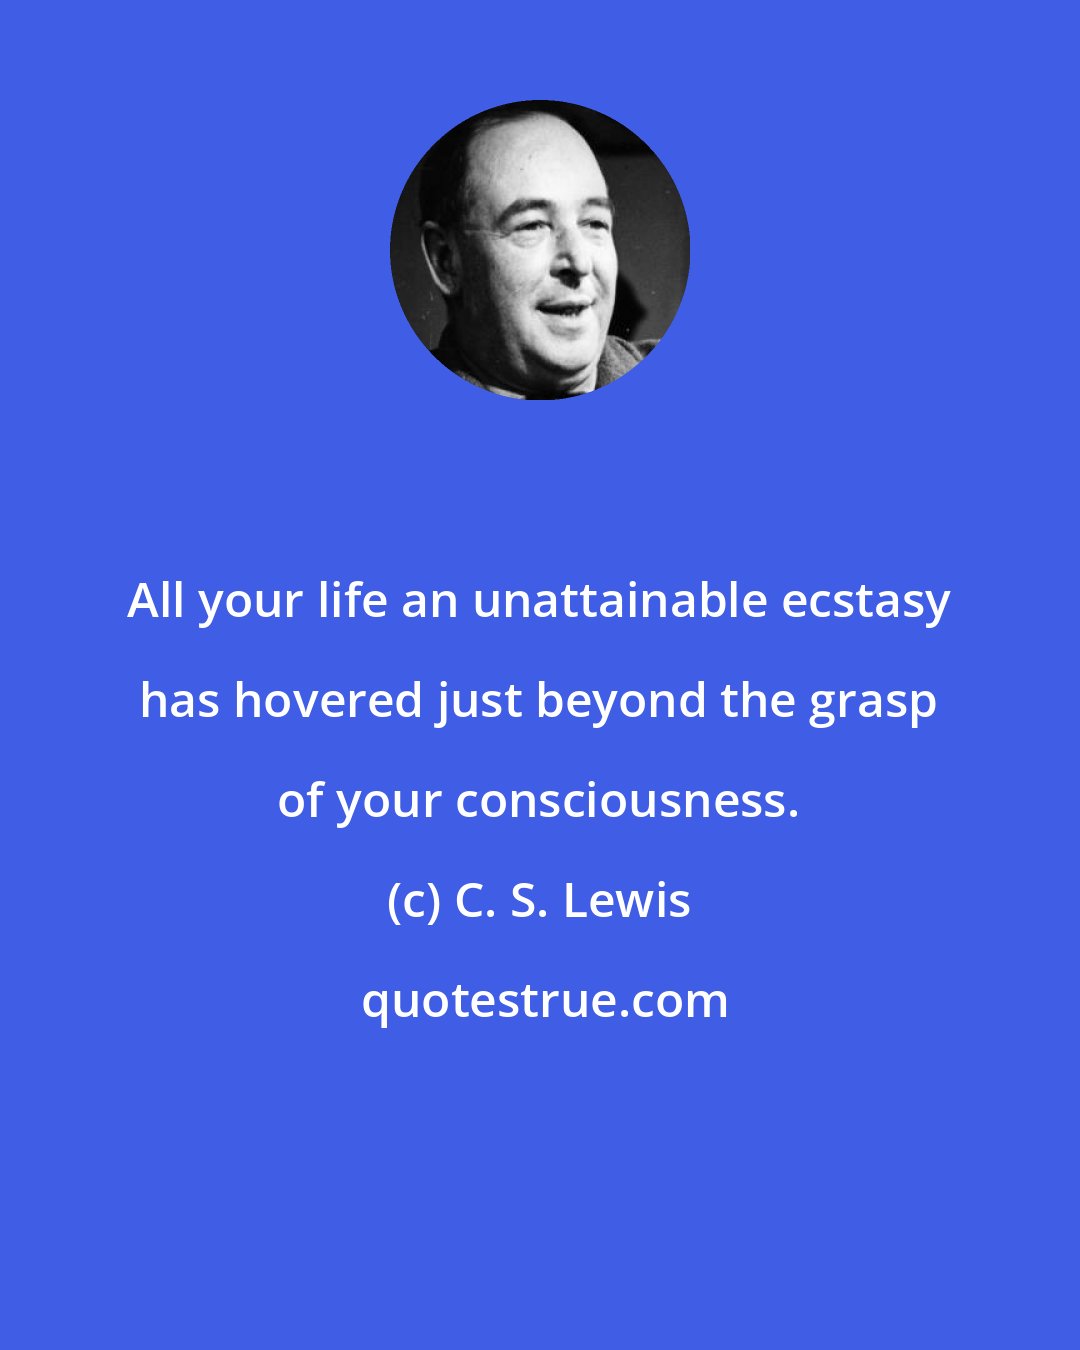 C. S. Lewis: All your life an unattainable ecstasy has hovered just beyond the grasp of your consciousness.